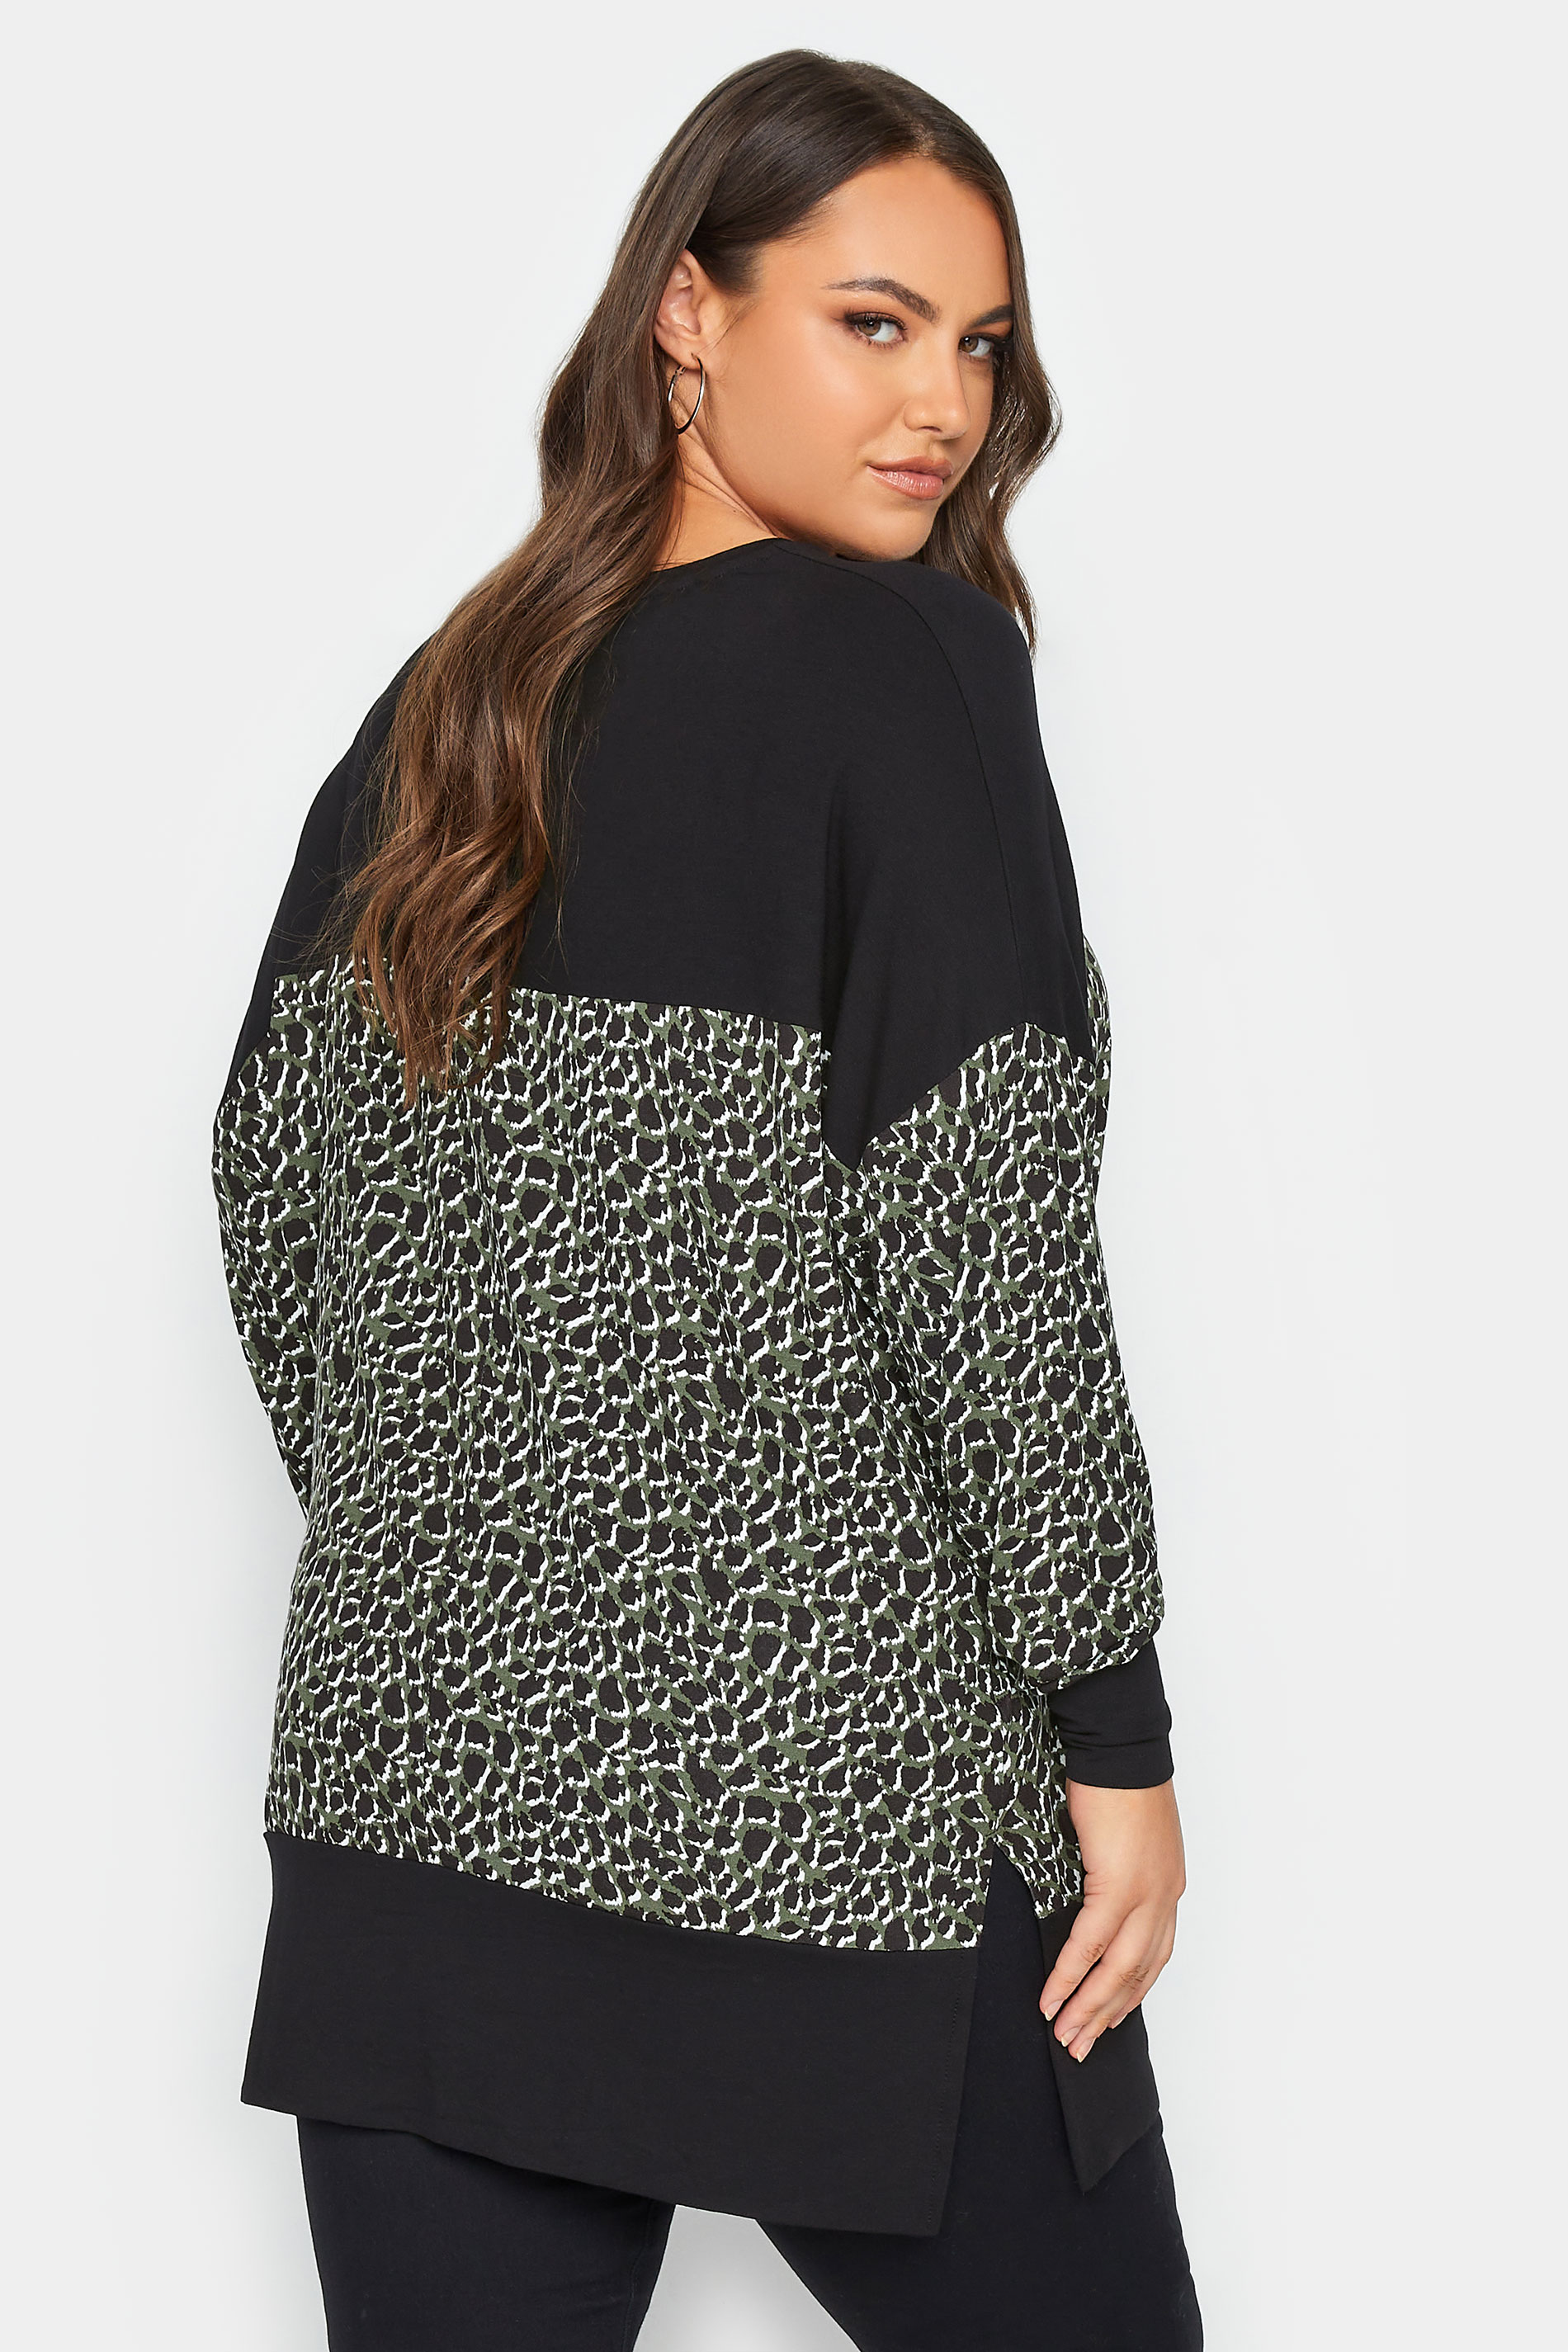 YOURS Plus Size Black Leopard Print Long Sleeve Top | Yours Clothing 3